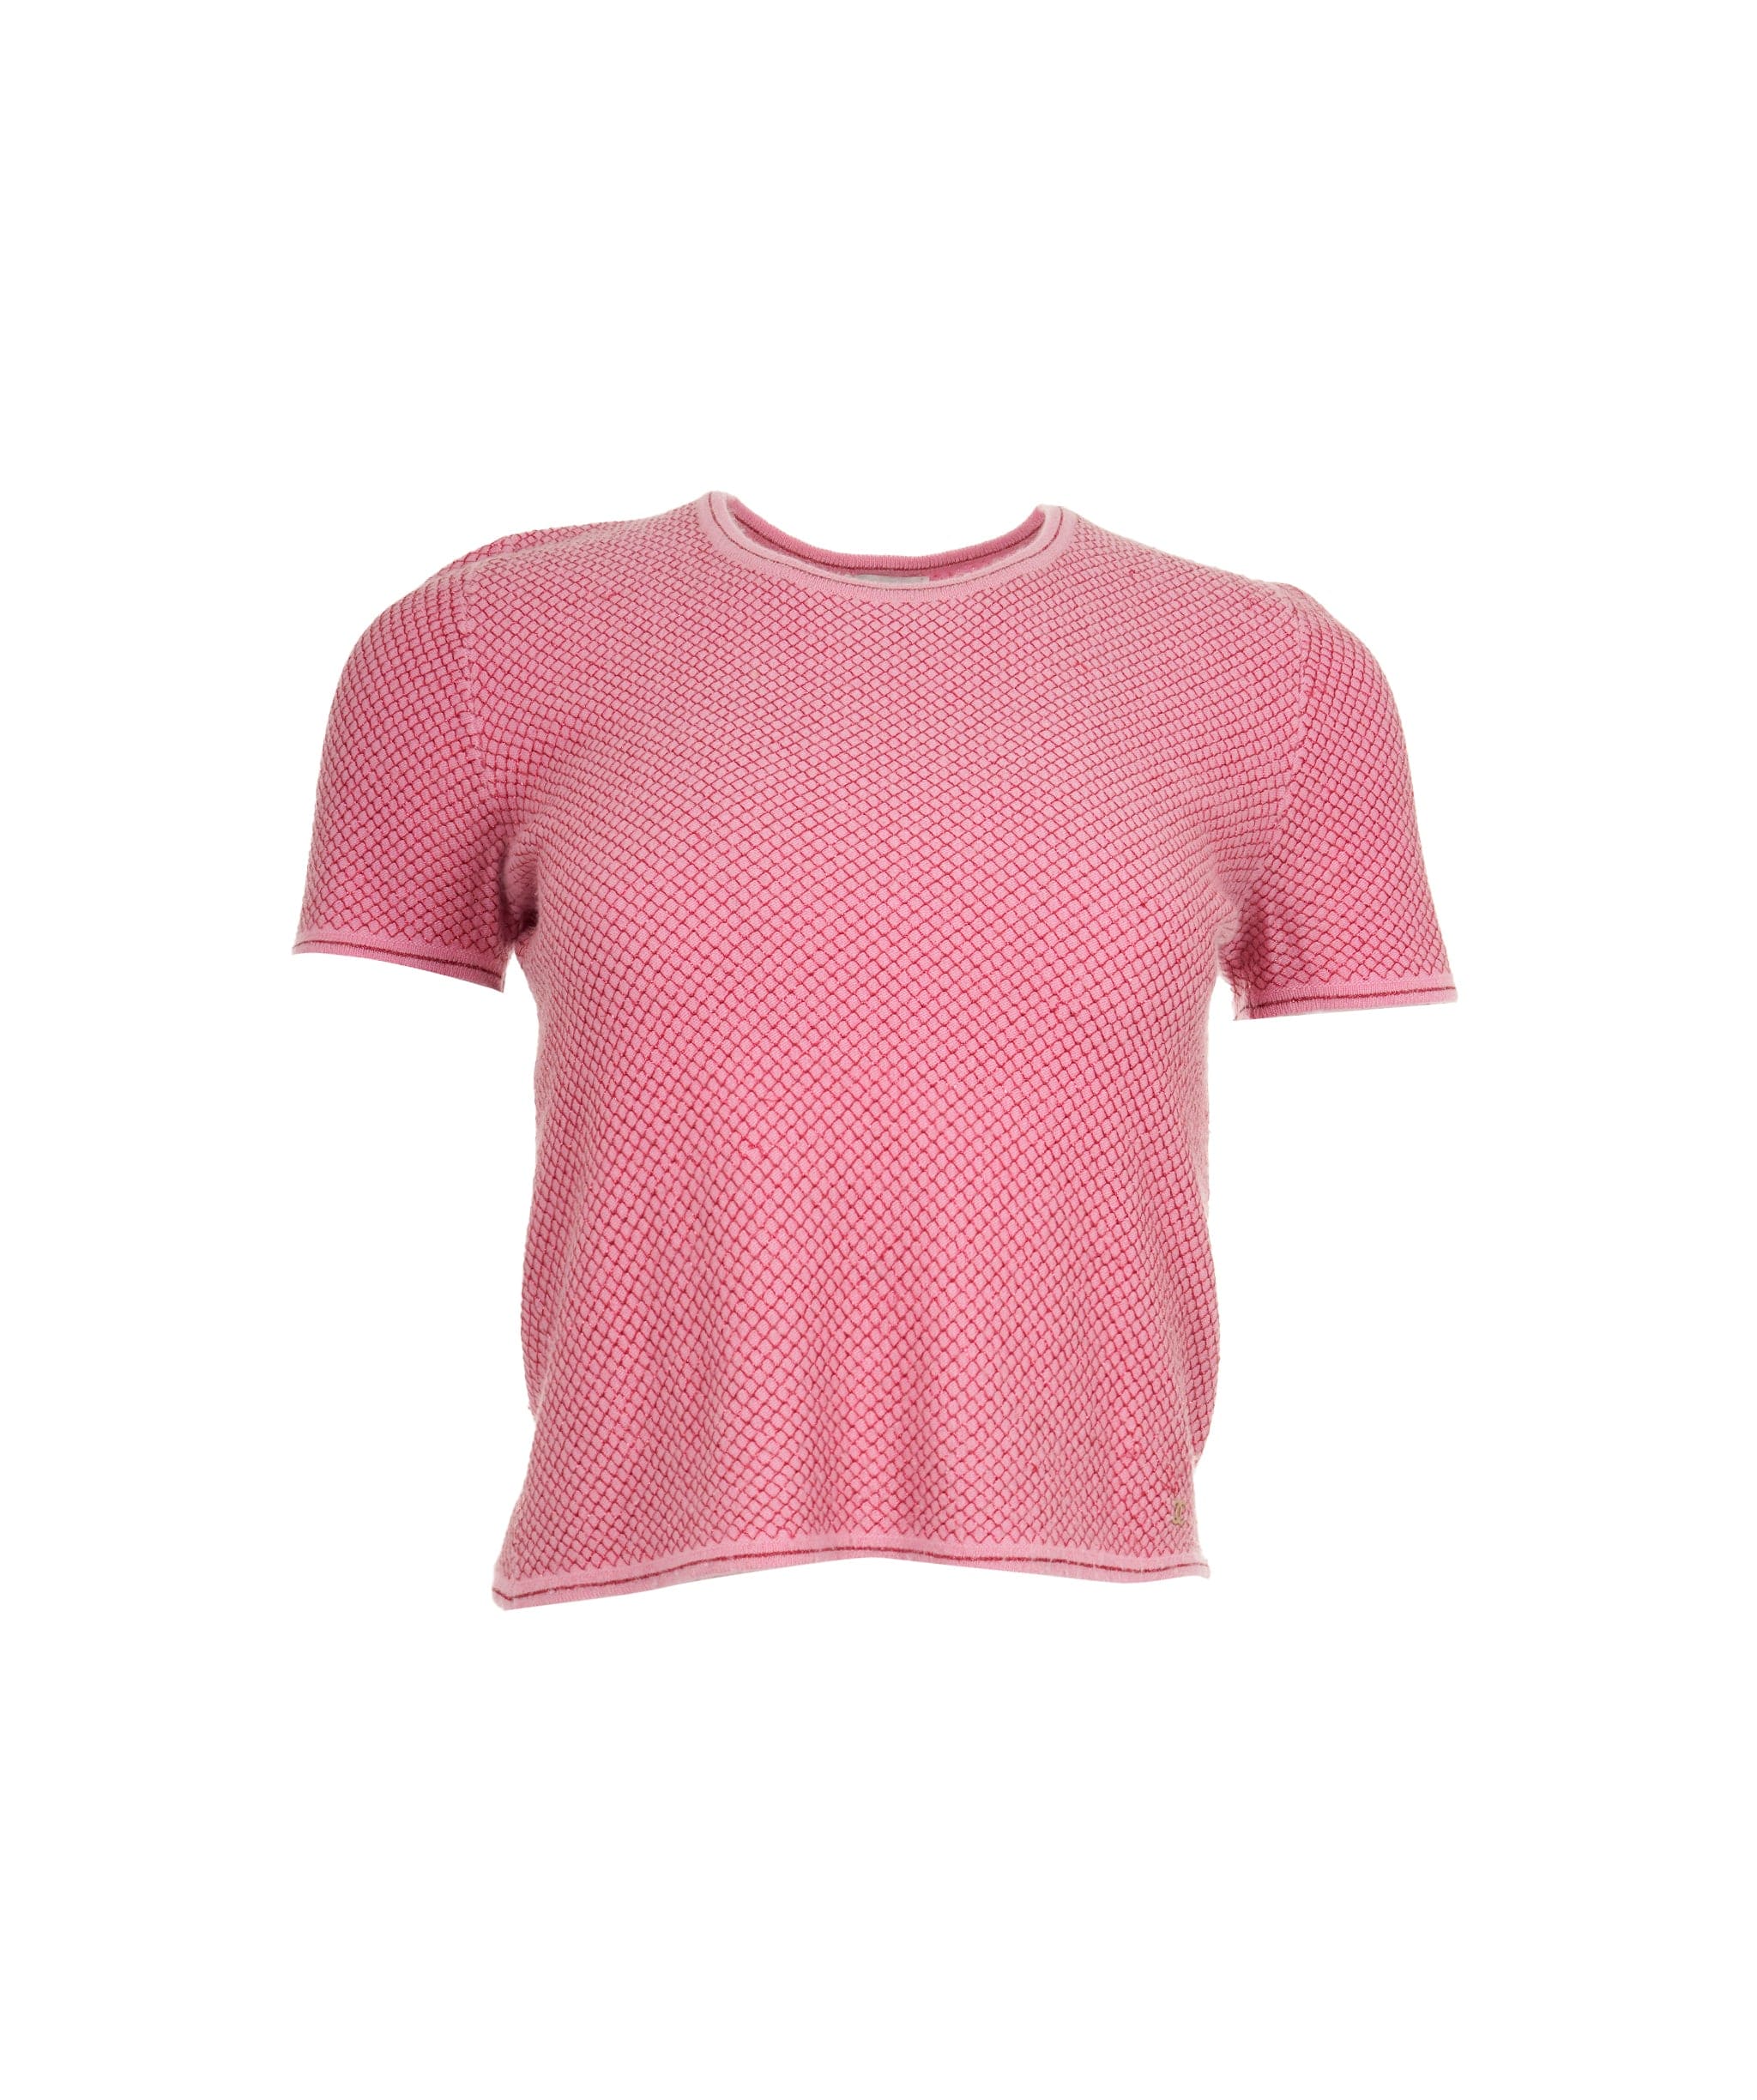 Chanel Chanel 01C Knit Top Pink ASL8306